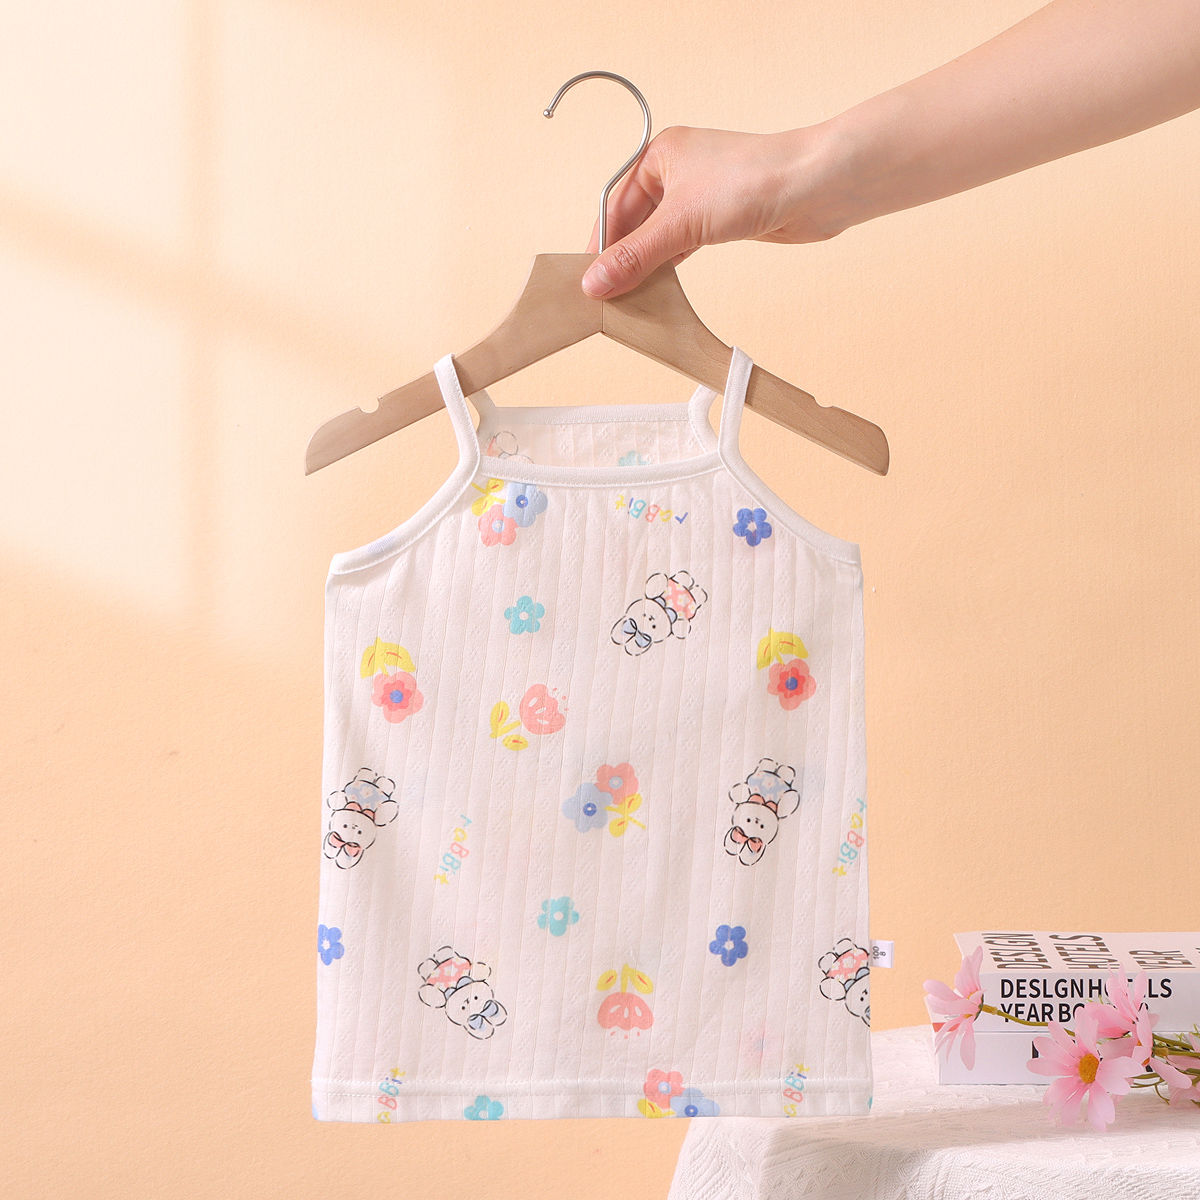 Children's Suspender Skirt Suit Summer Girls Cotton Pajamas Home Clothes Outside Wear Vest Short Skirt Baby Air Conditioning Clothes